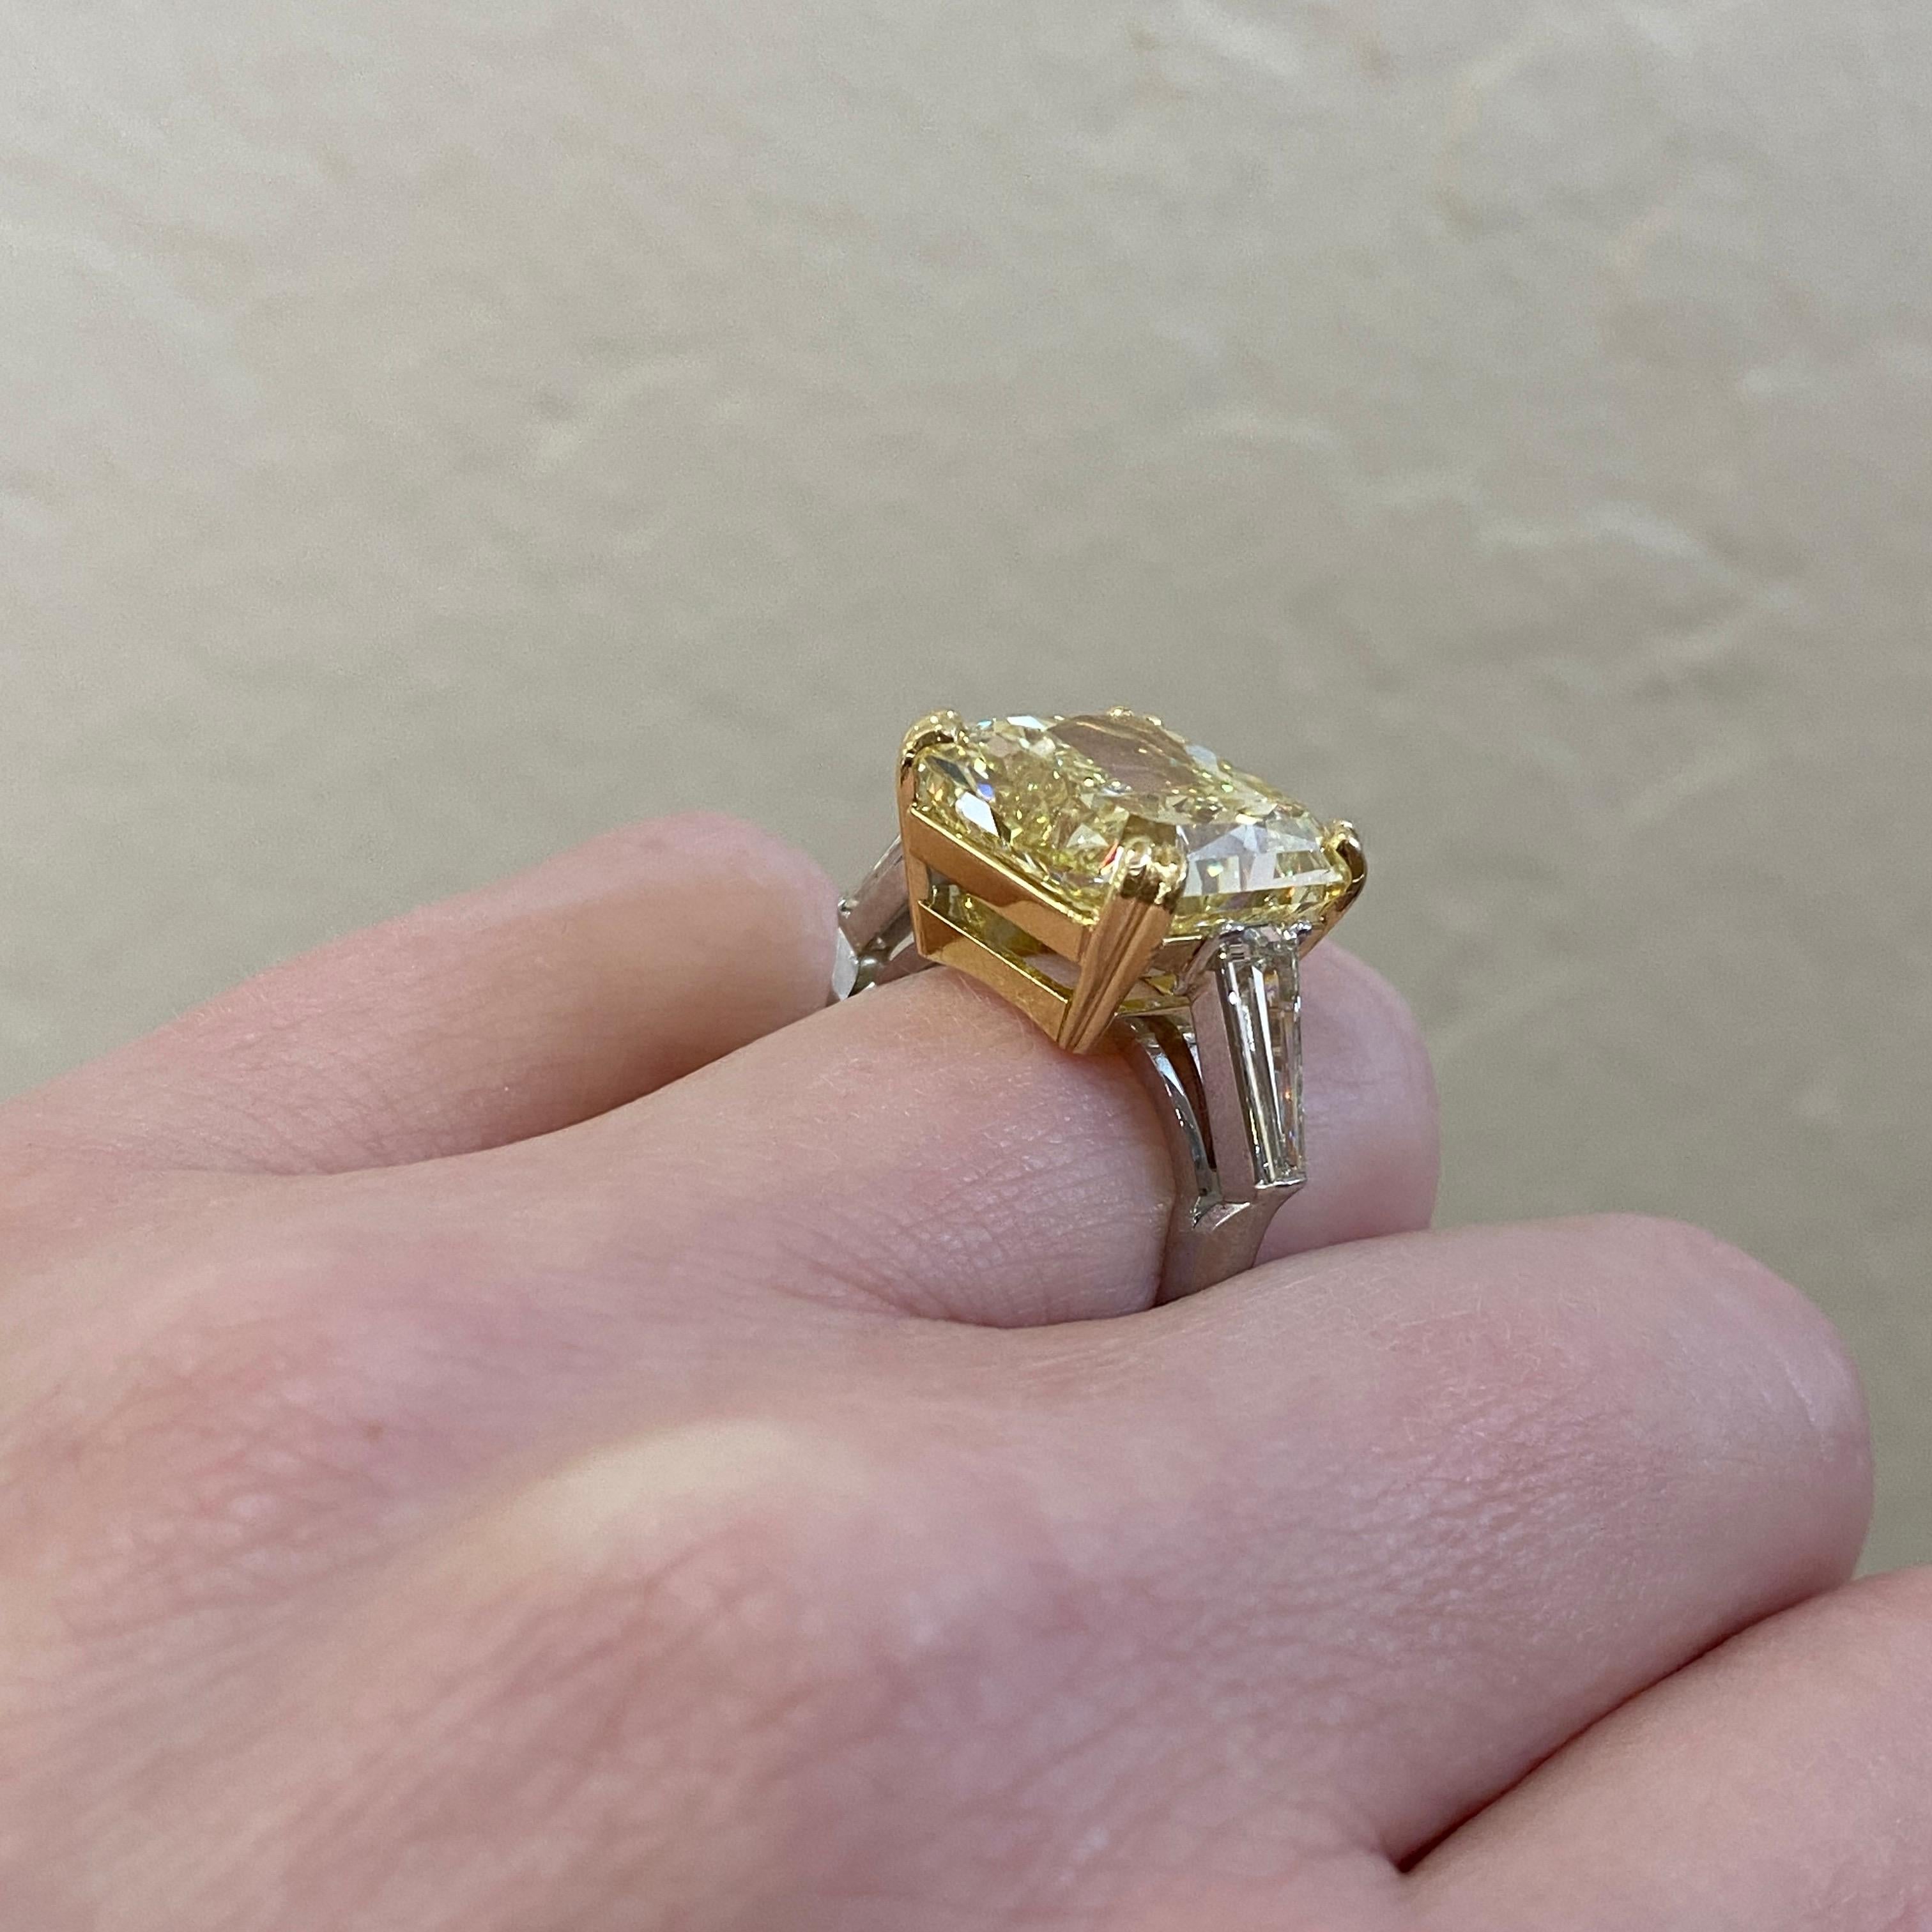 Mark Areias J. Handmade Platinum & 18k Fancy Yellow Diamond Ring In New Condition For Sale In Carmel-by-the-Sea, CA